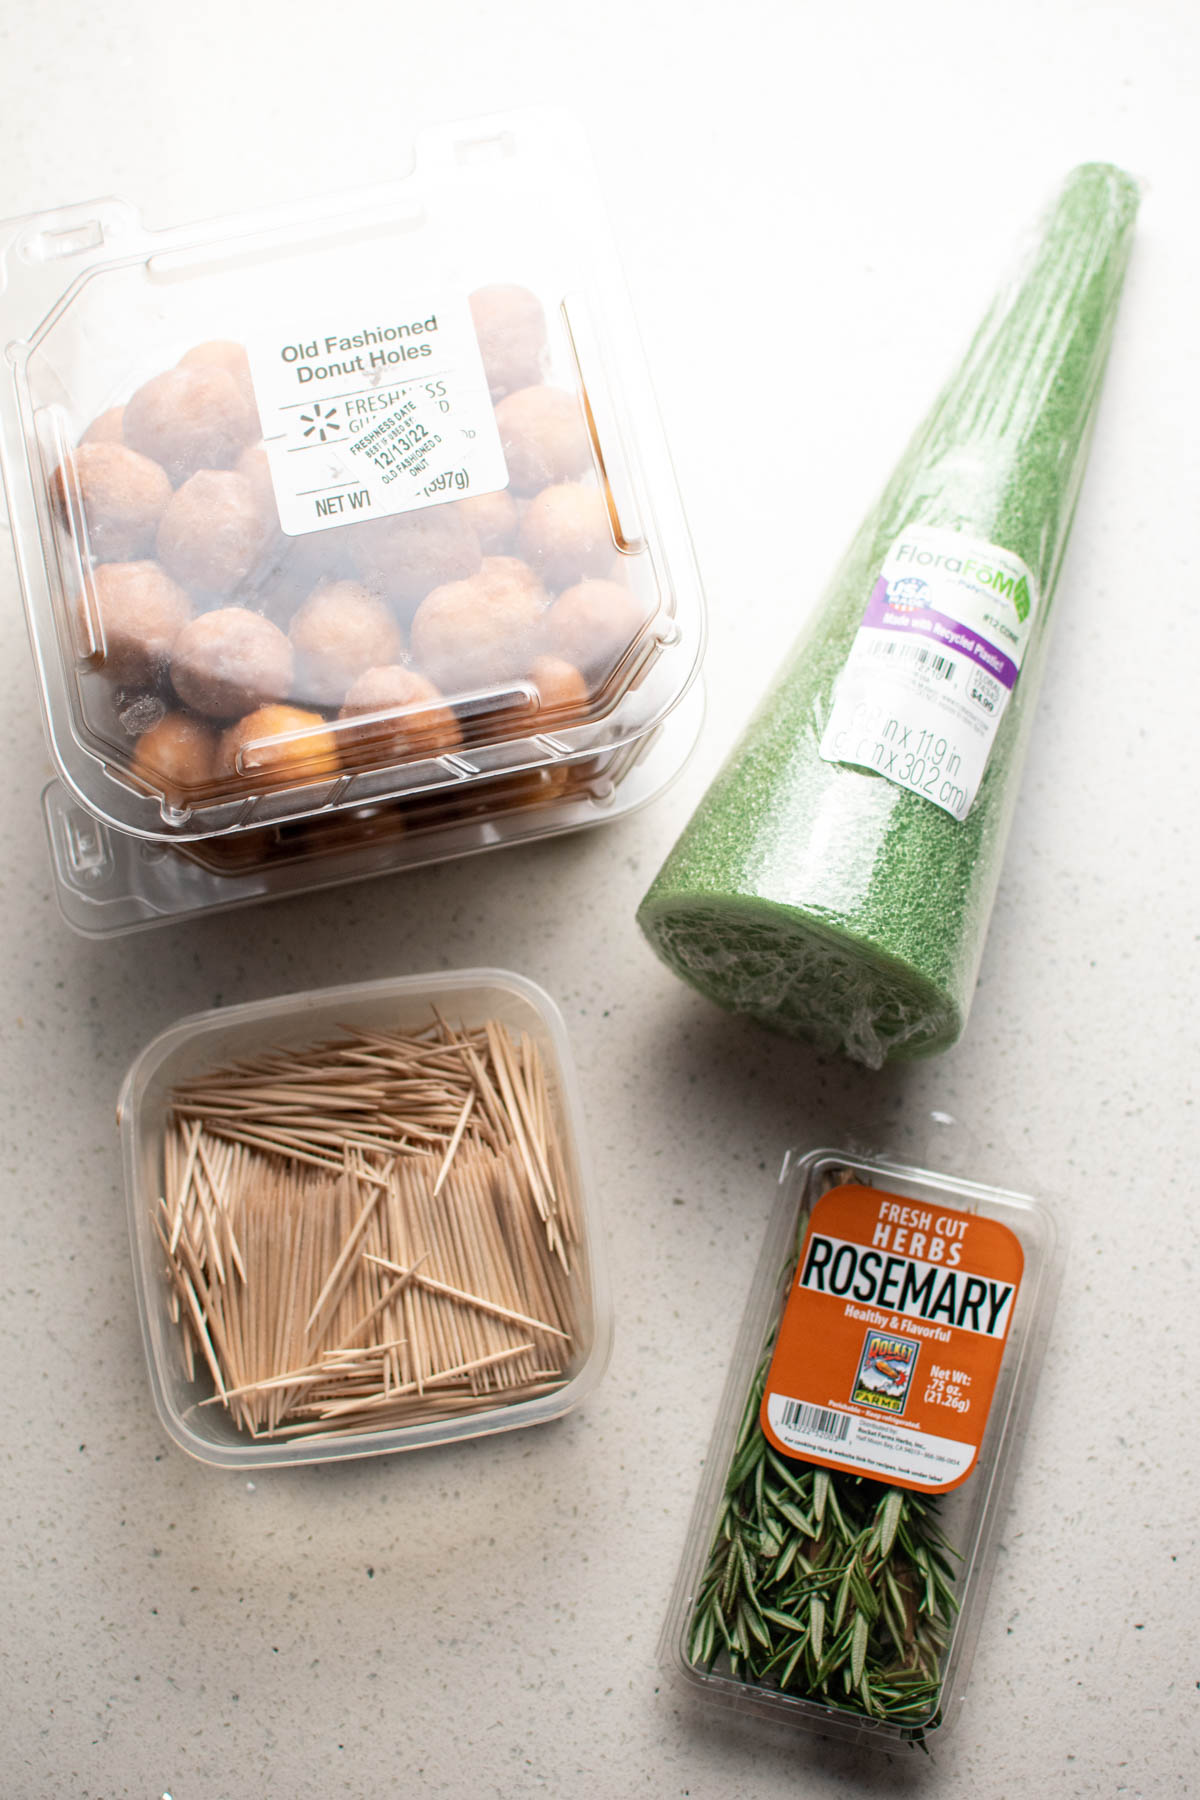 Ingredients for a donut hole tree on counter including foam cone, toothpicks, and donuts.